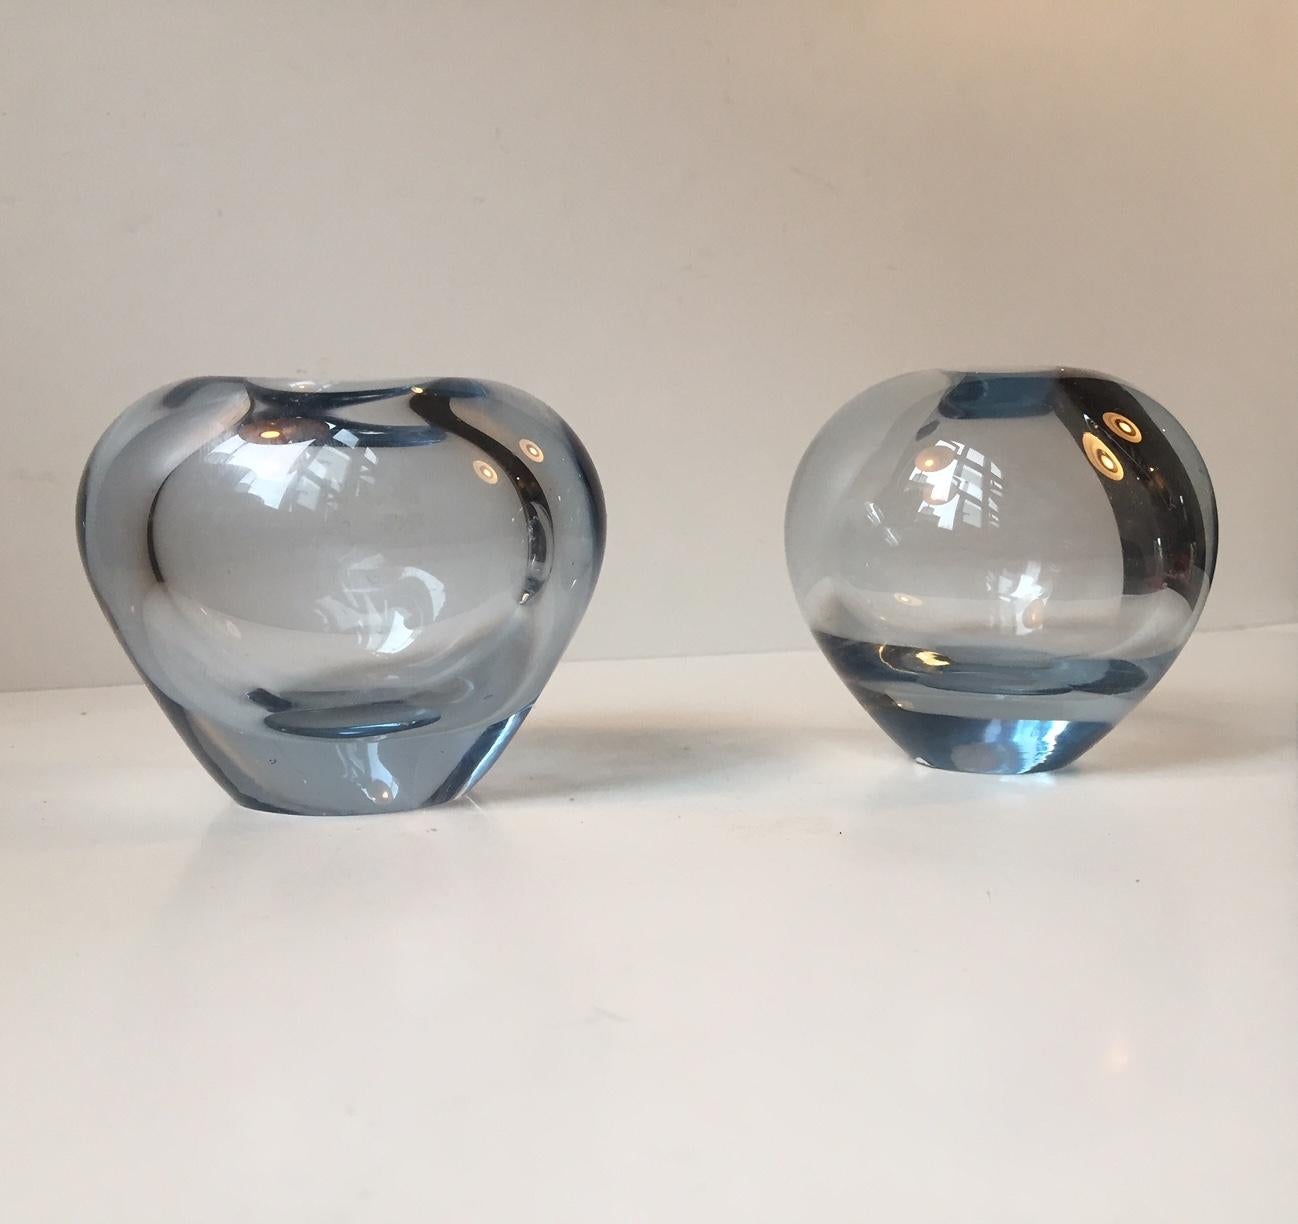 Blue tinted vases by Danish glass blower Per Lütken. They are called the 'Heart and Ball' vases. Both are signed by hand by the maker and designer (PL) to the bottom and dated 1960 and 1962. The height of the smaller vase is 8 cm.